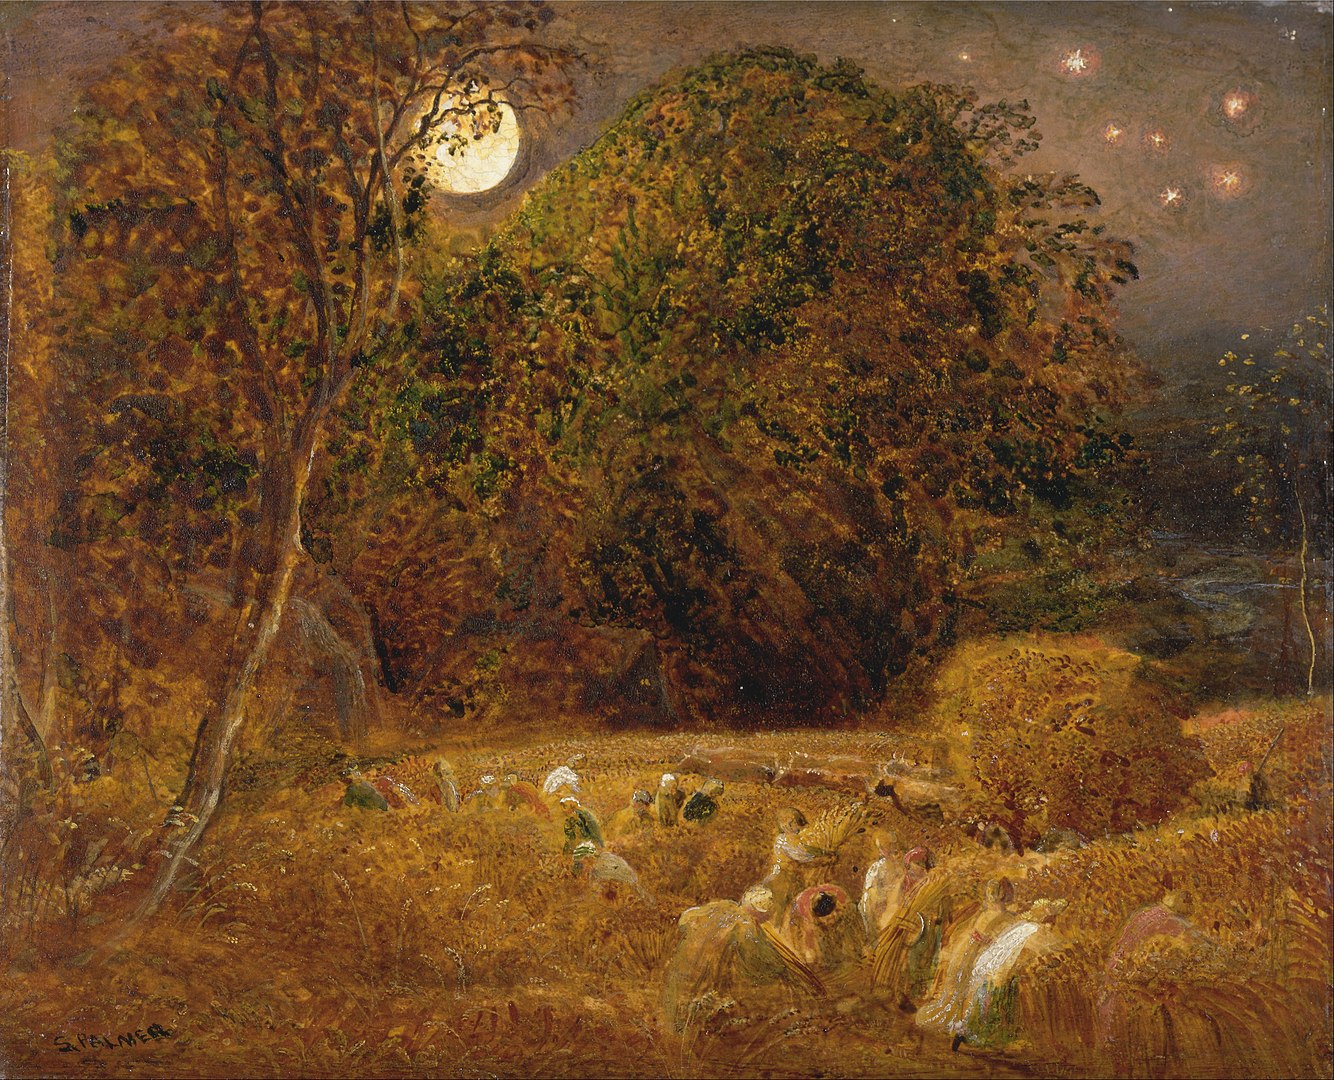 A landscape view of a farm beside a forest during a full moon with farmers below